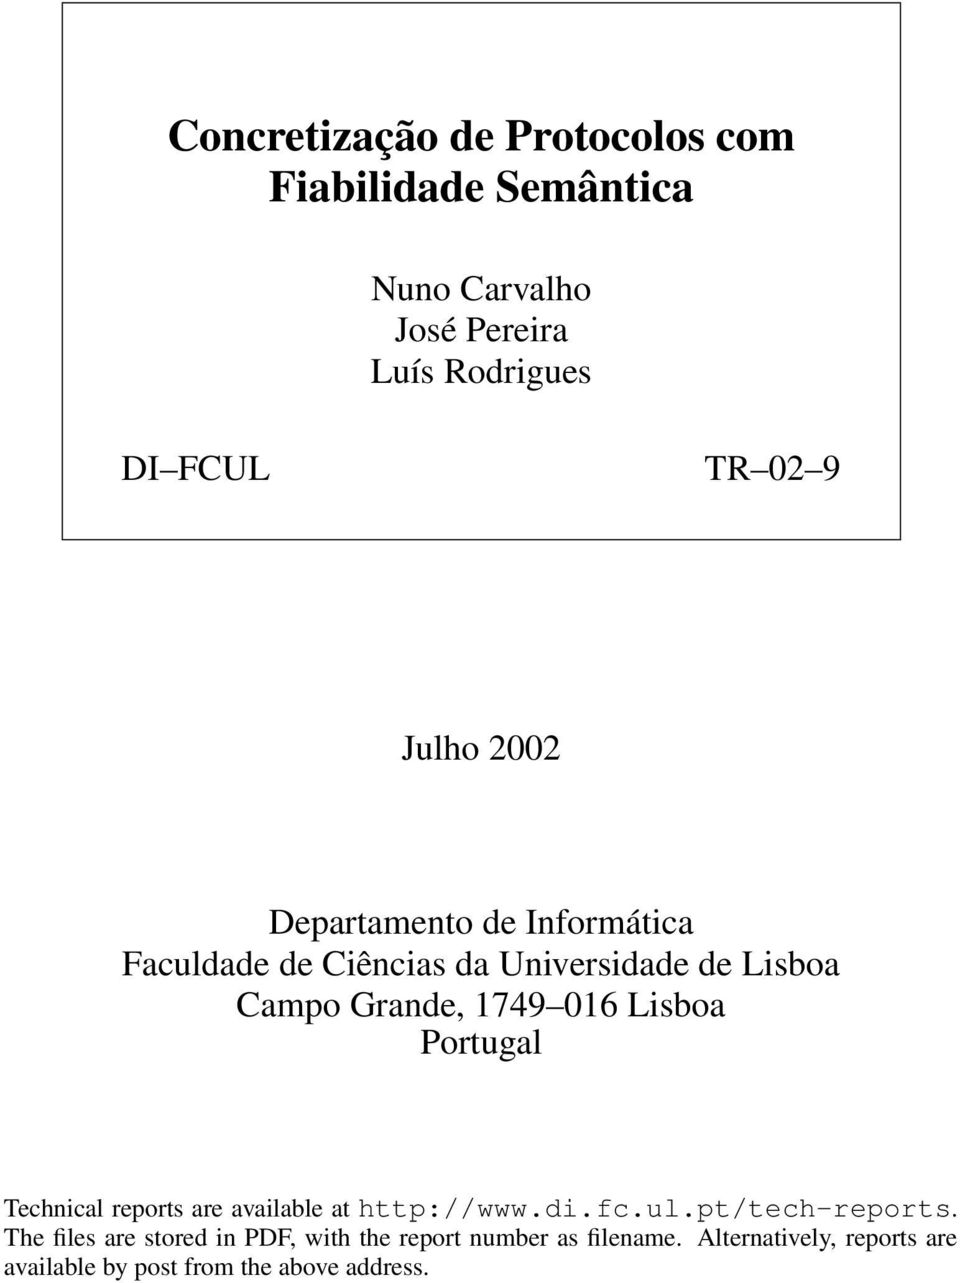 016 Lisboa Portugal Technical reports are available at http://www.di.fc.ul.pt/tech-reports.